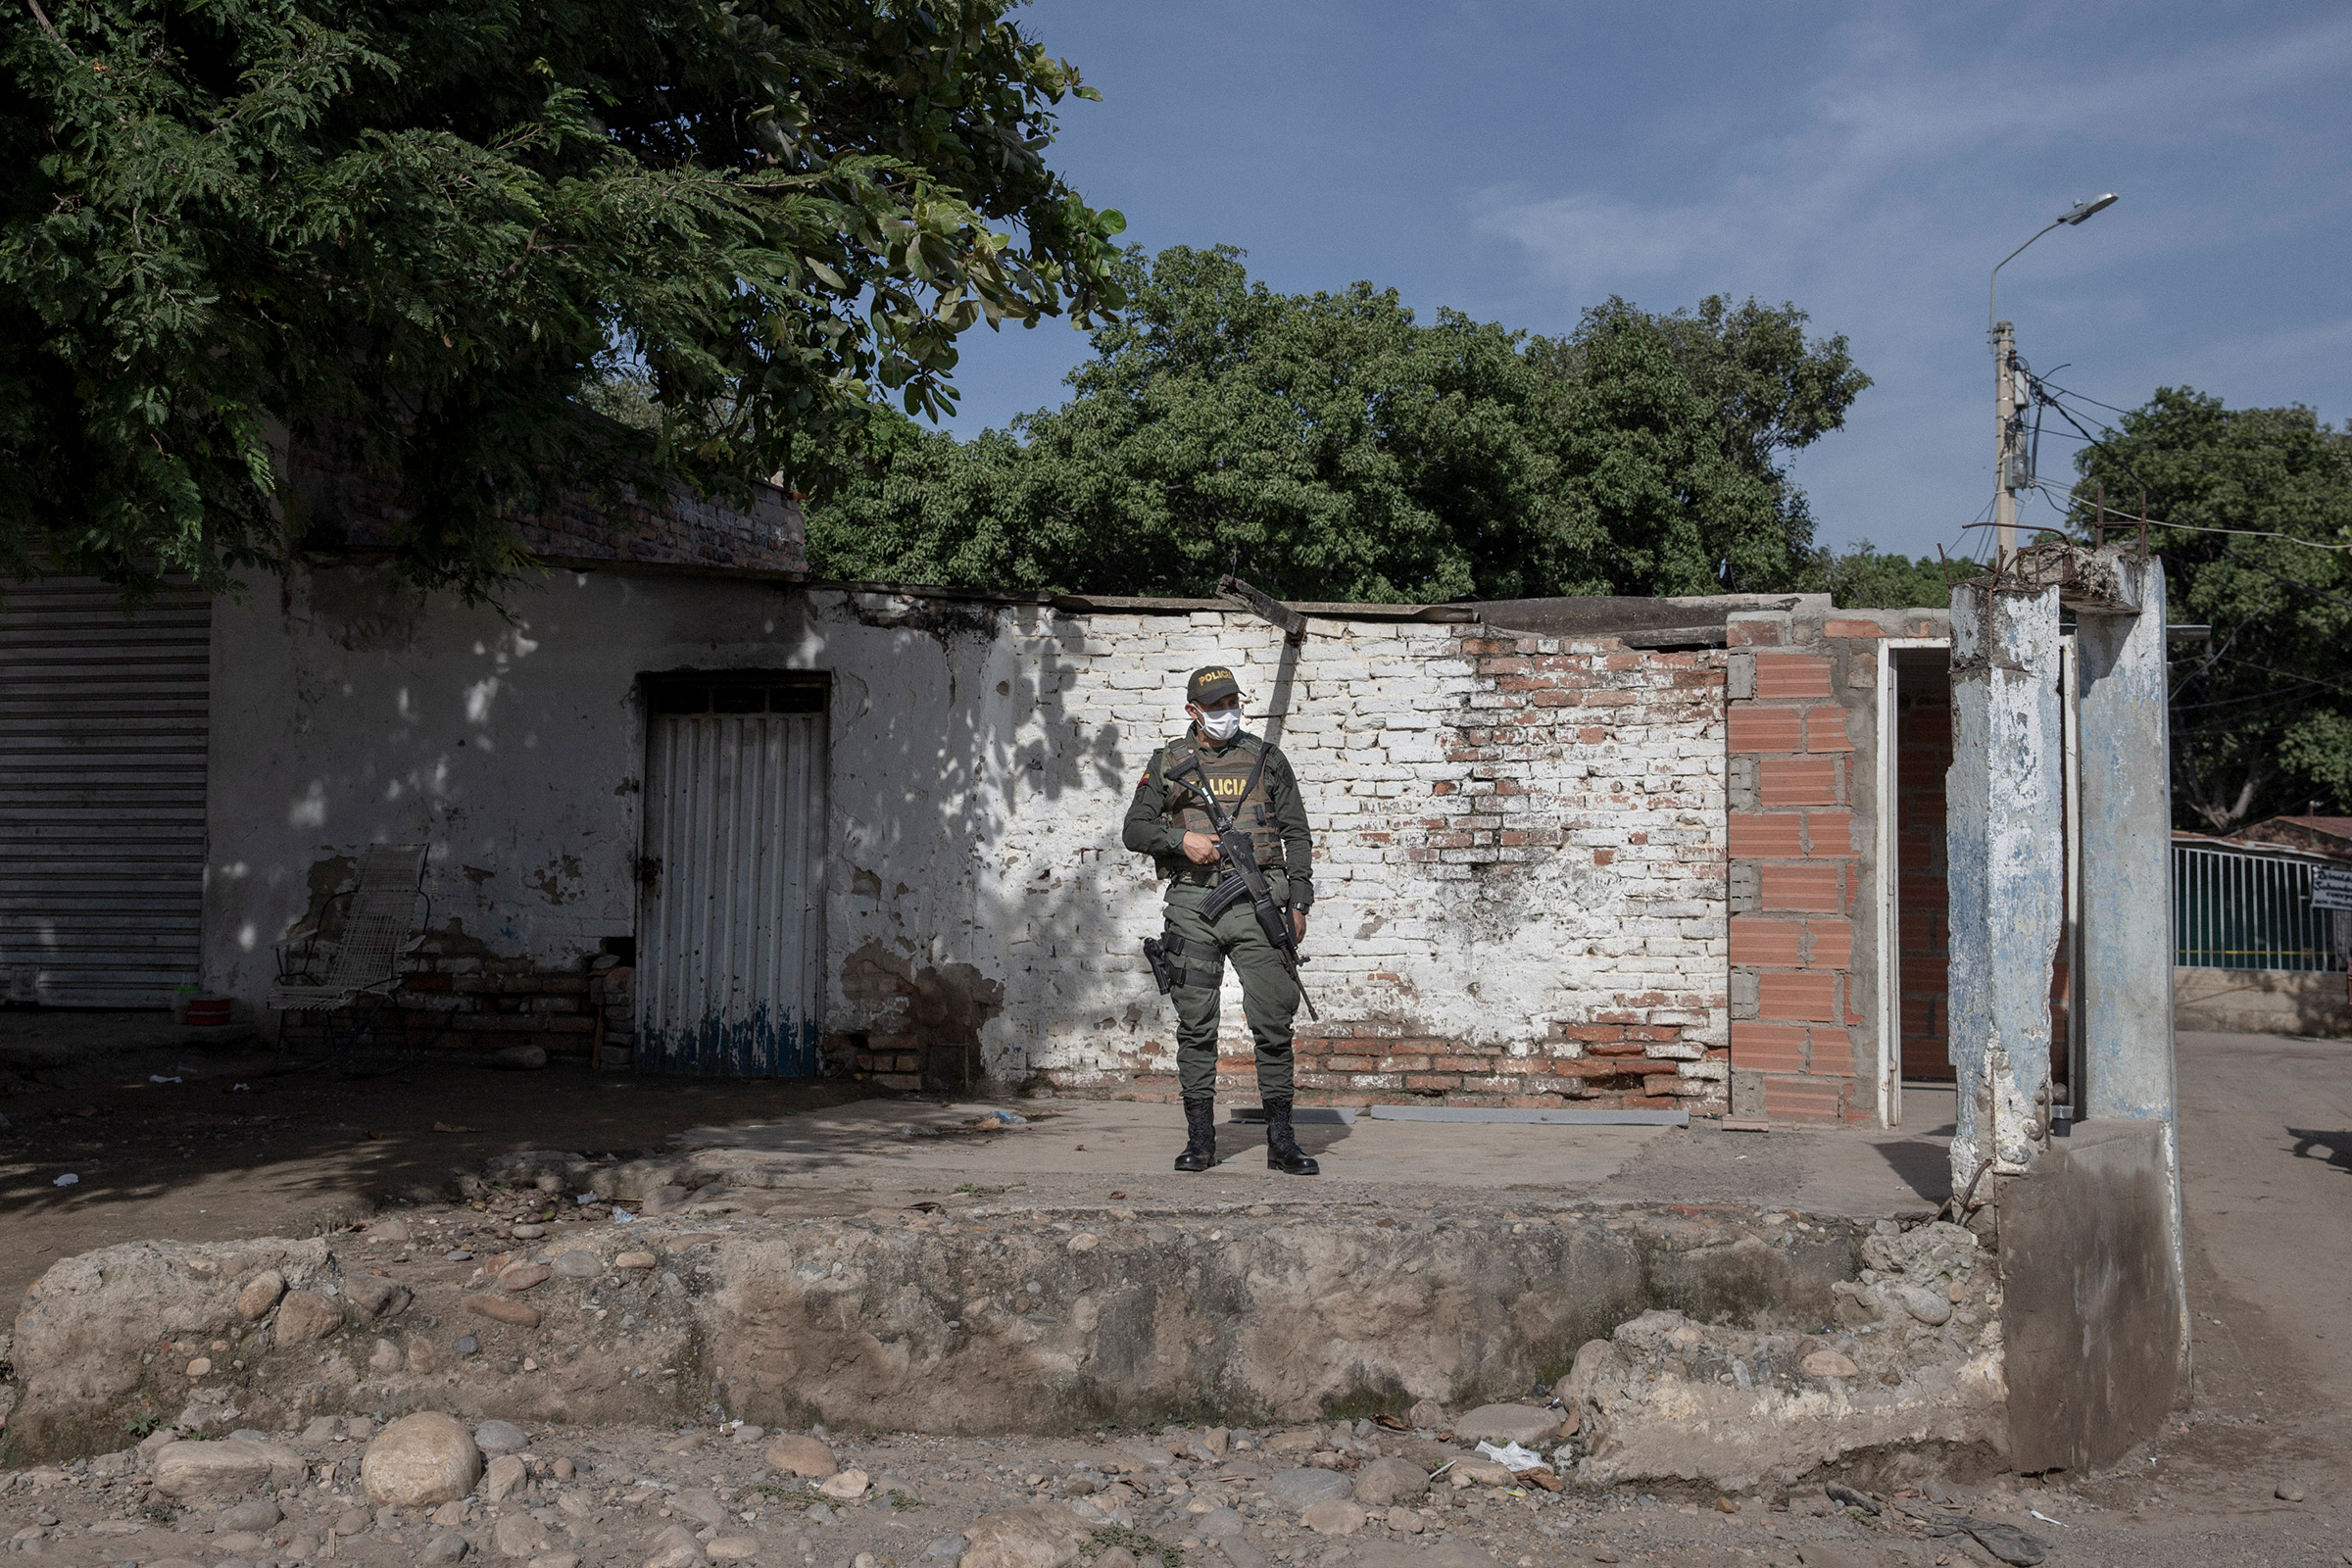 A Colombian police officer stands at the entrance of an illegal border crossing.